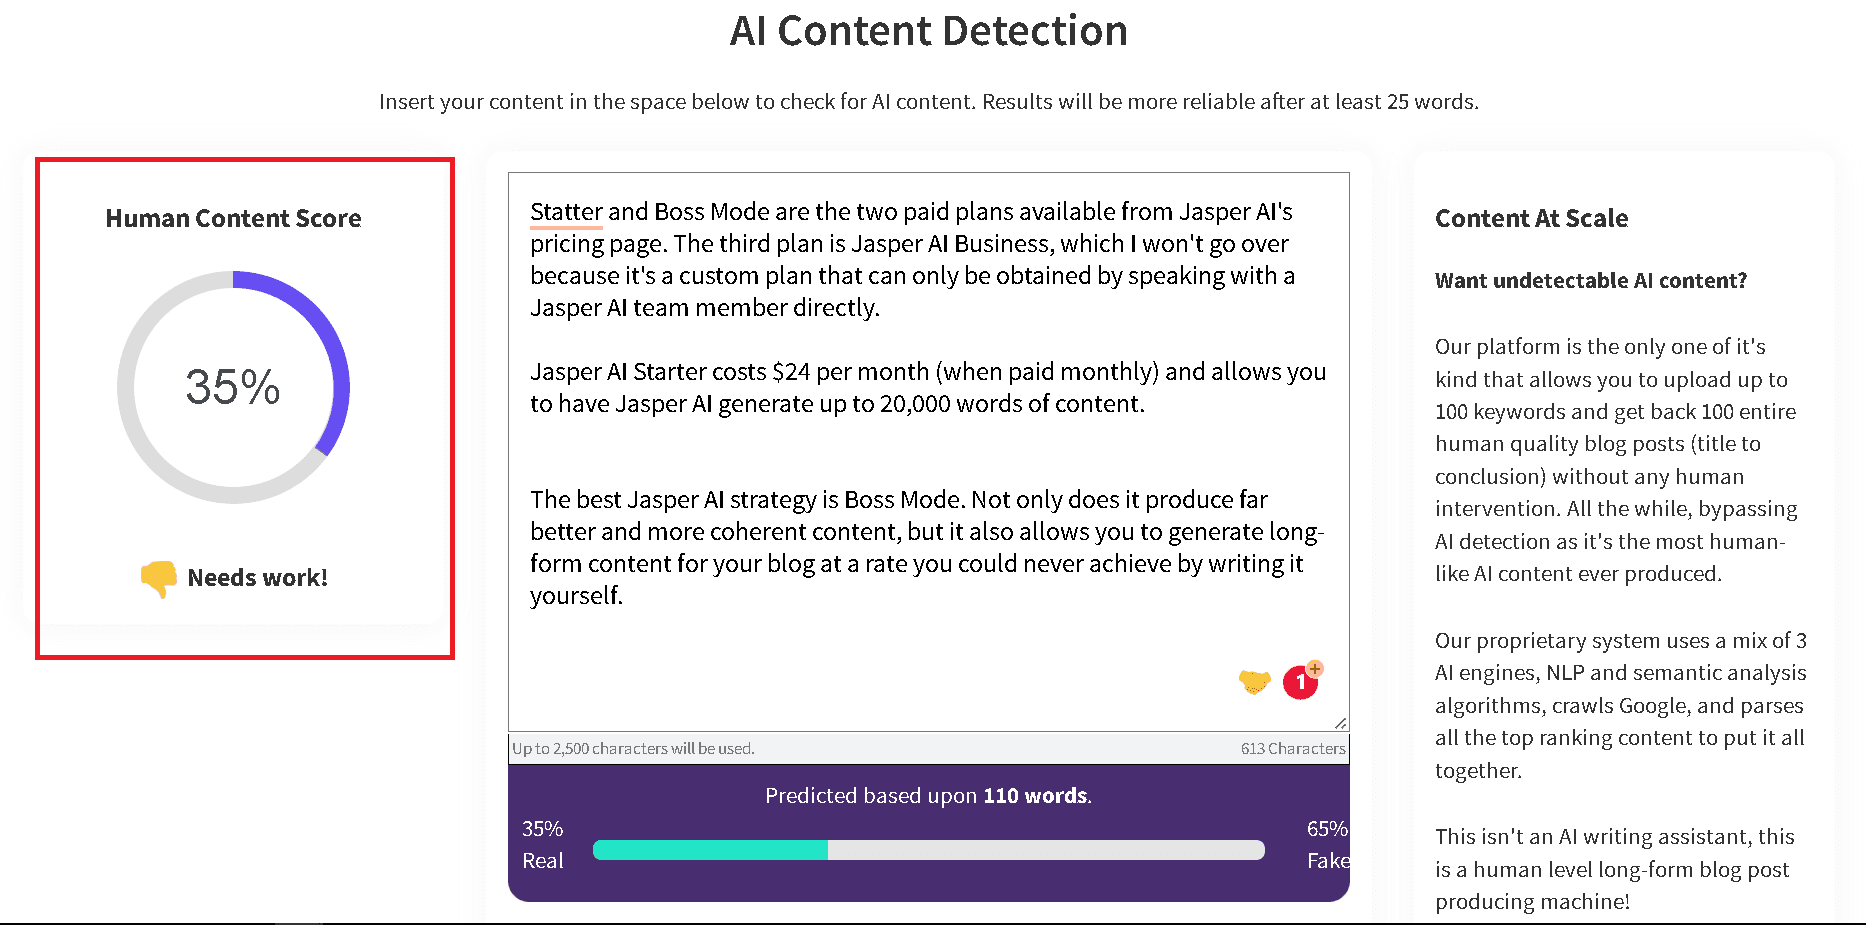 Content paraphrased with Quillbot can be detected by AI content detectors